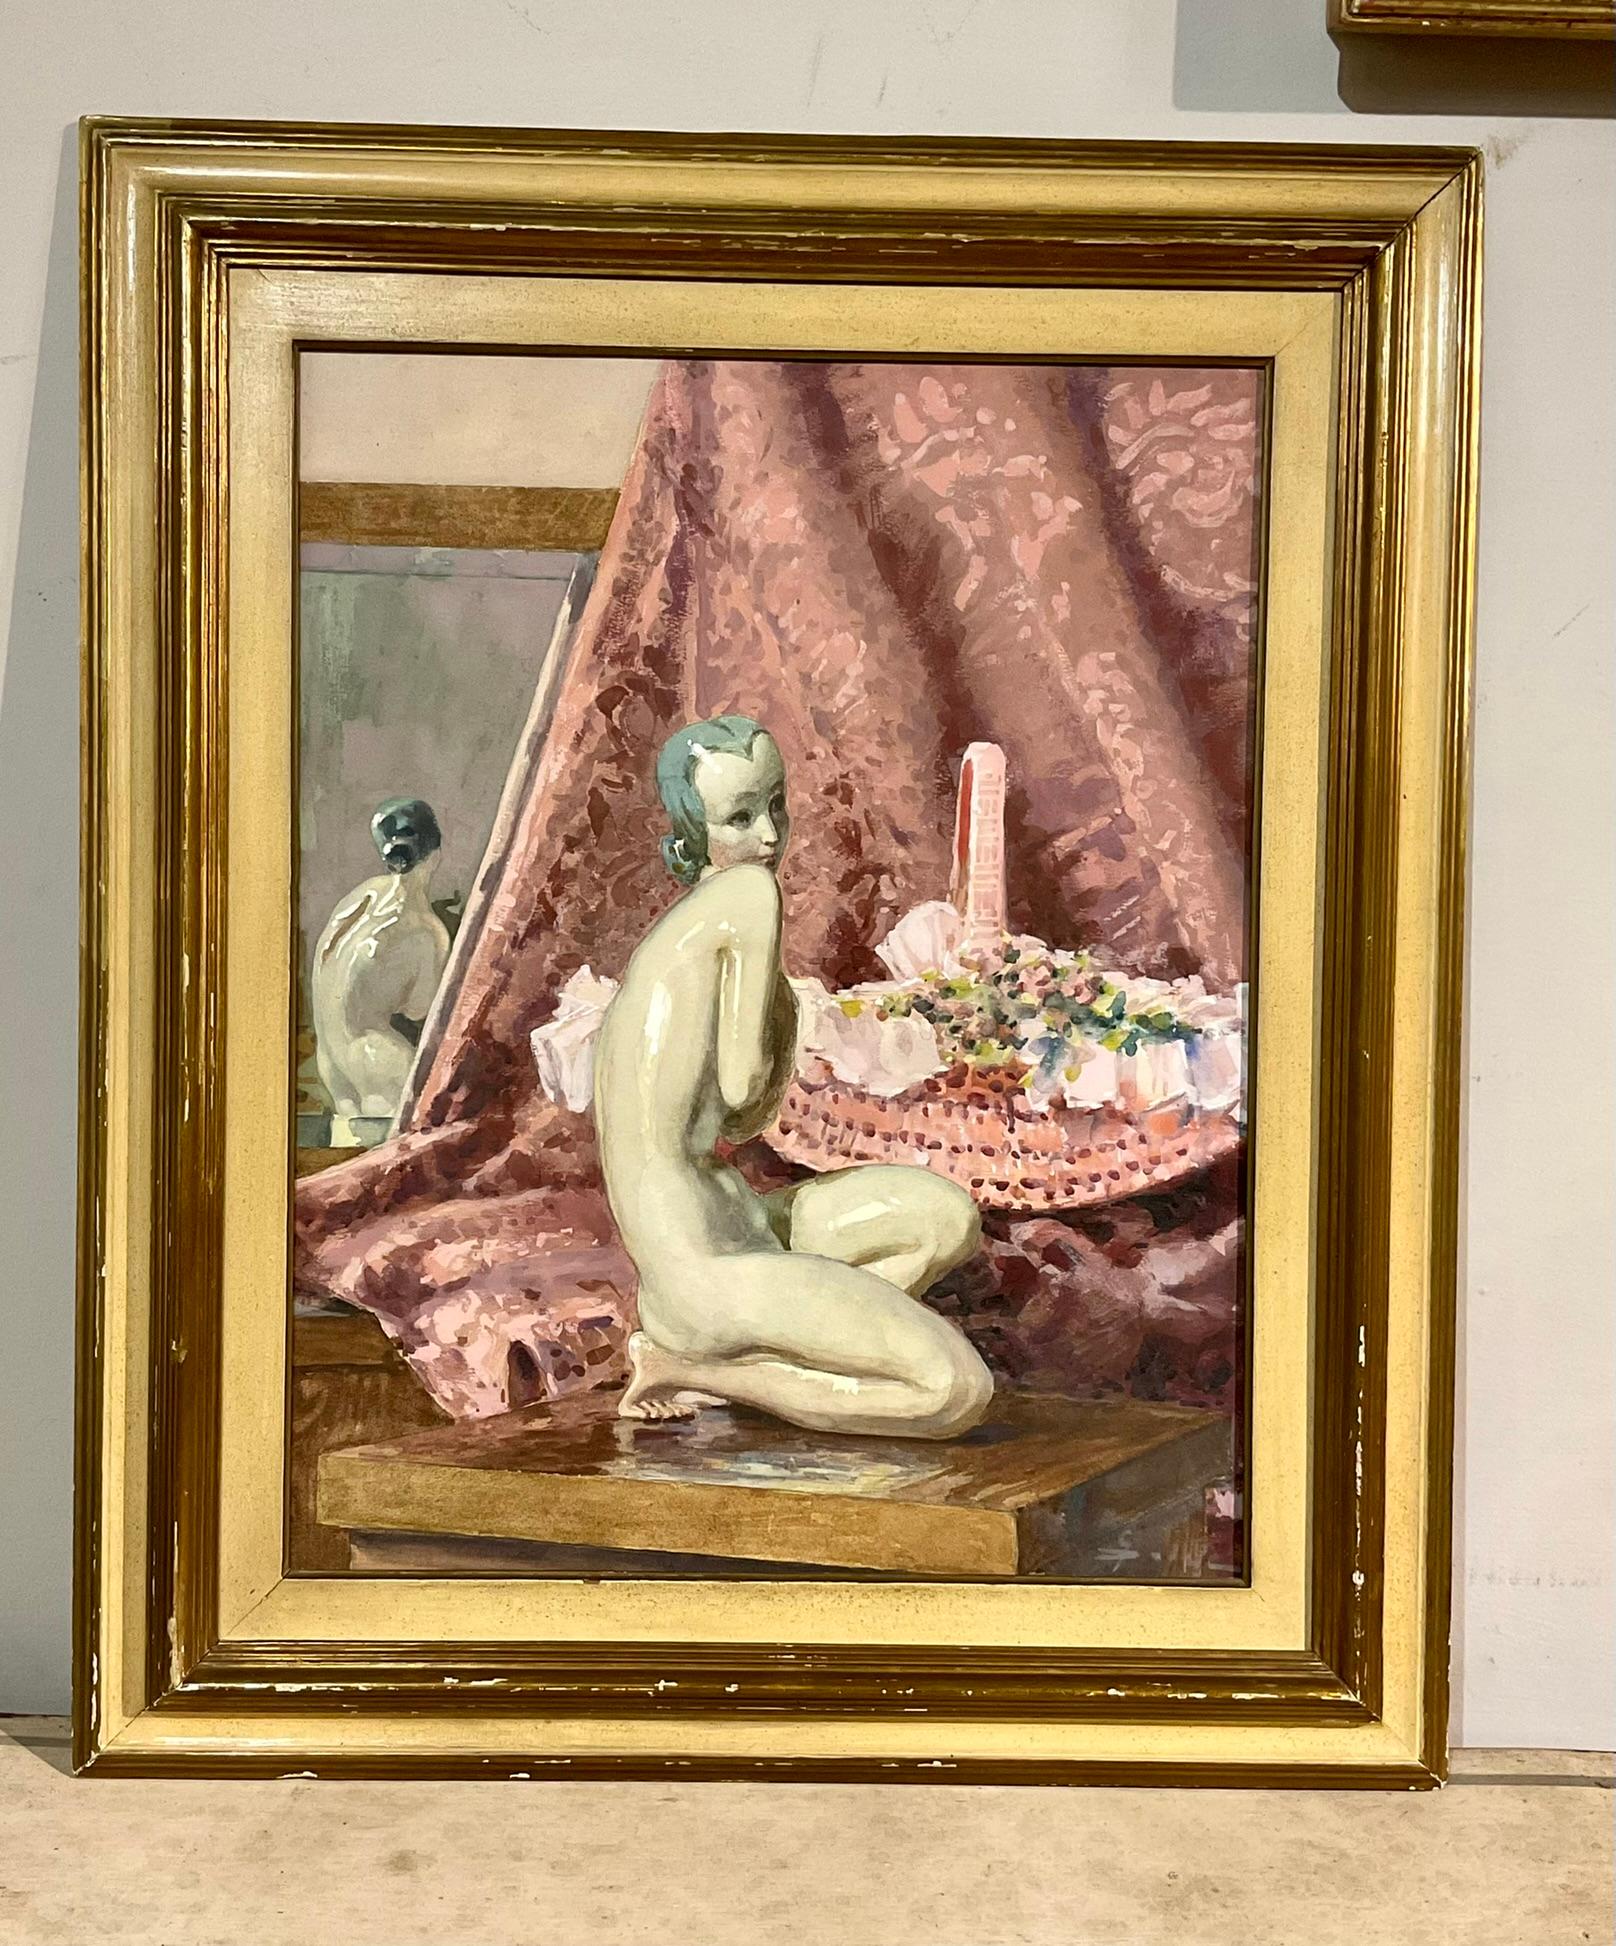 Beautiful interior scene with in the foreground a Lenci Manufacture ceramic figure, in front of a mirror and a pink basket.
Unidentified painter from the 1950s.